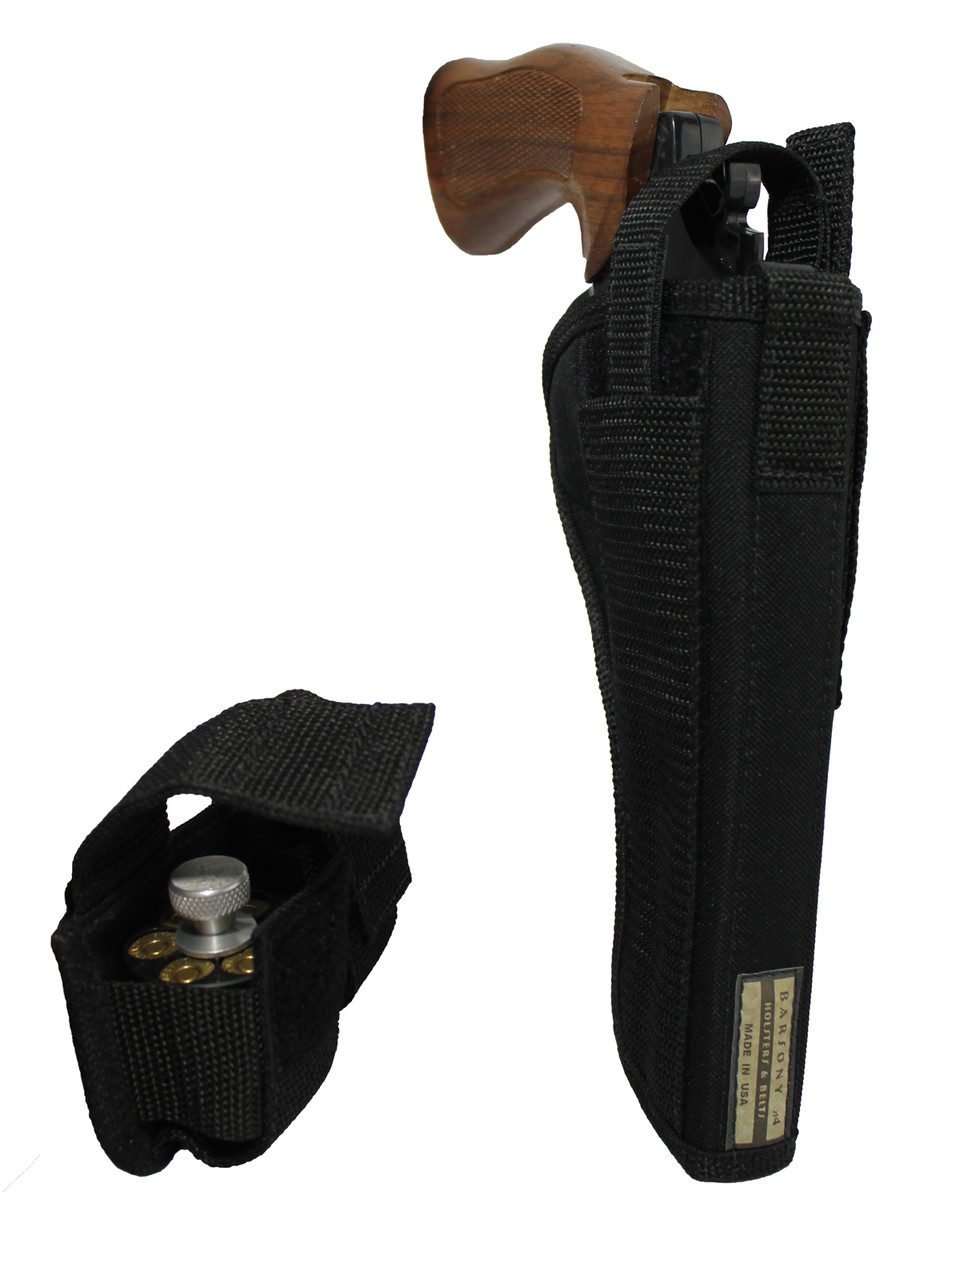 Outside the Waistband Holster + Speed-loader Pouch for 6" 22 38 357 41 44 Revolvers